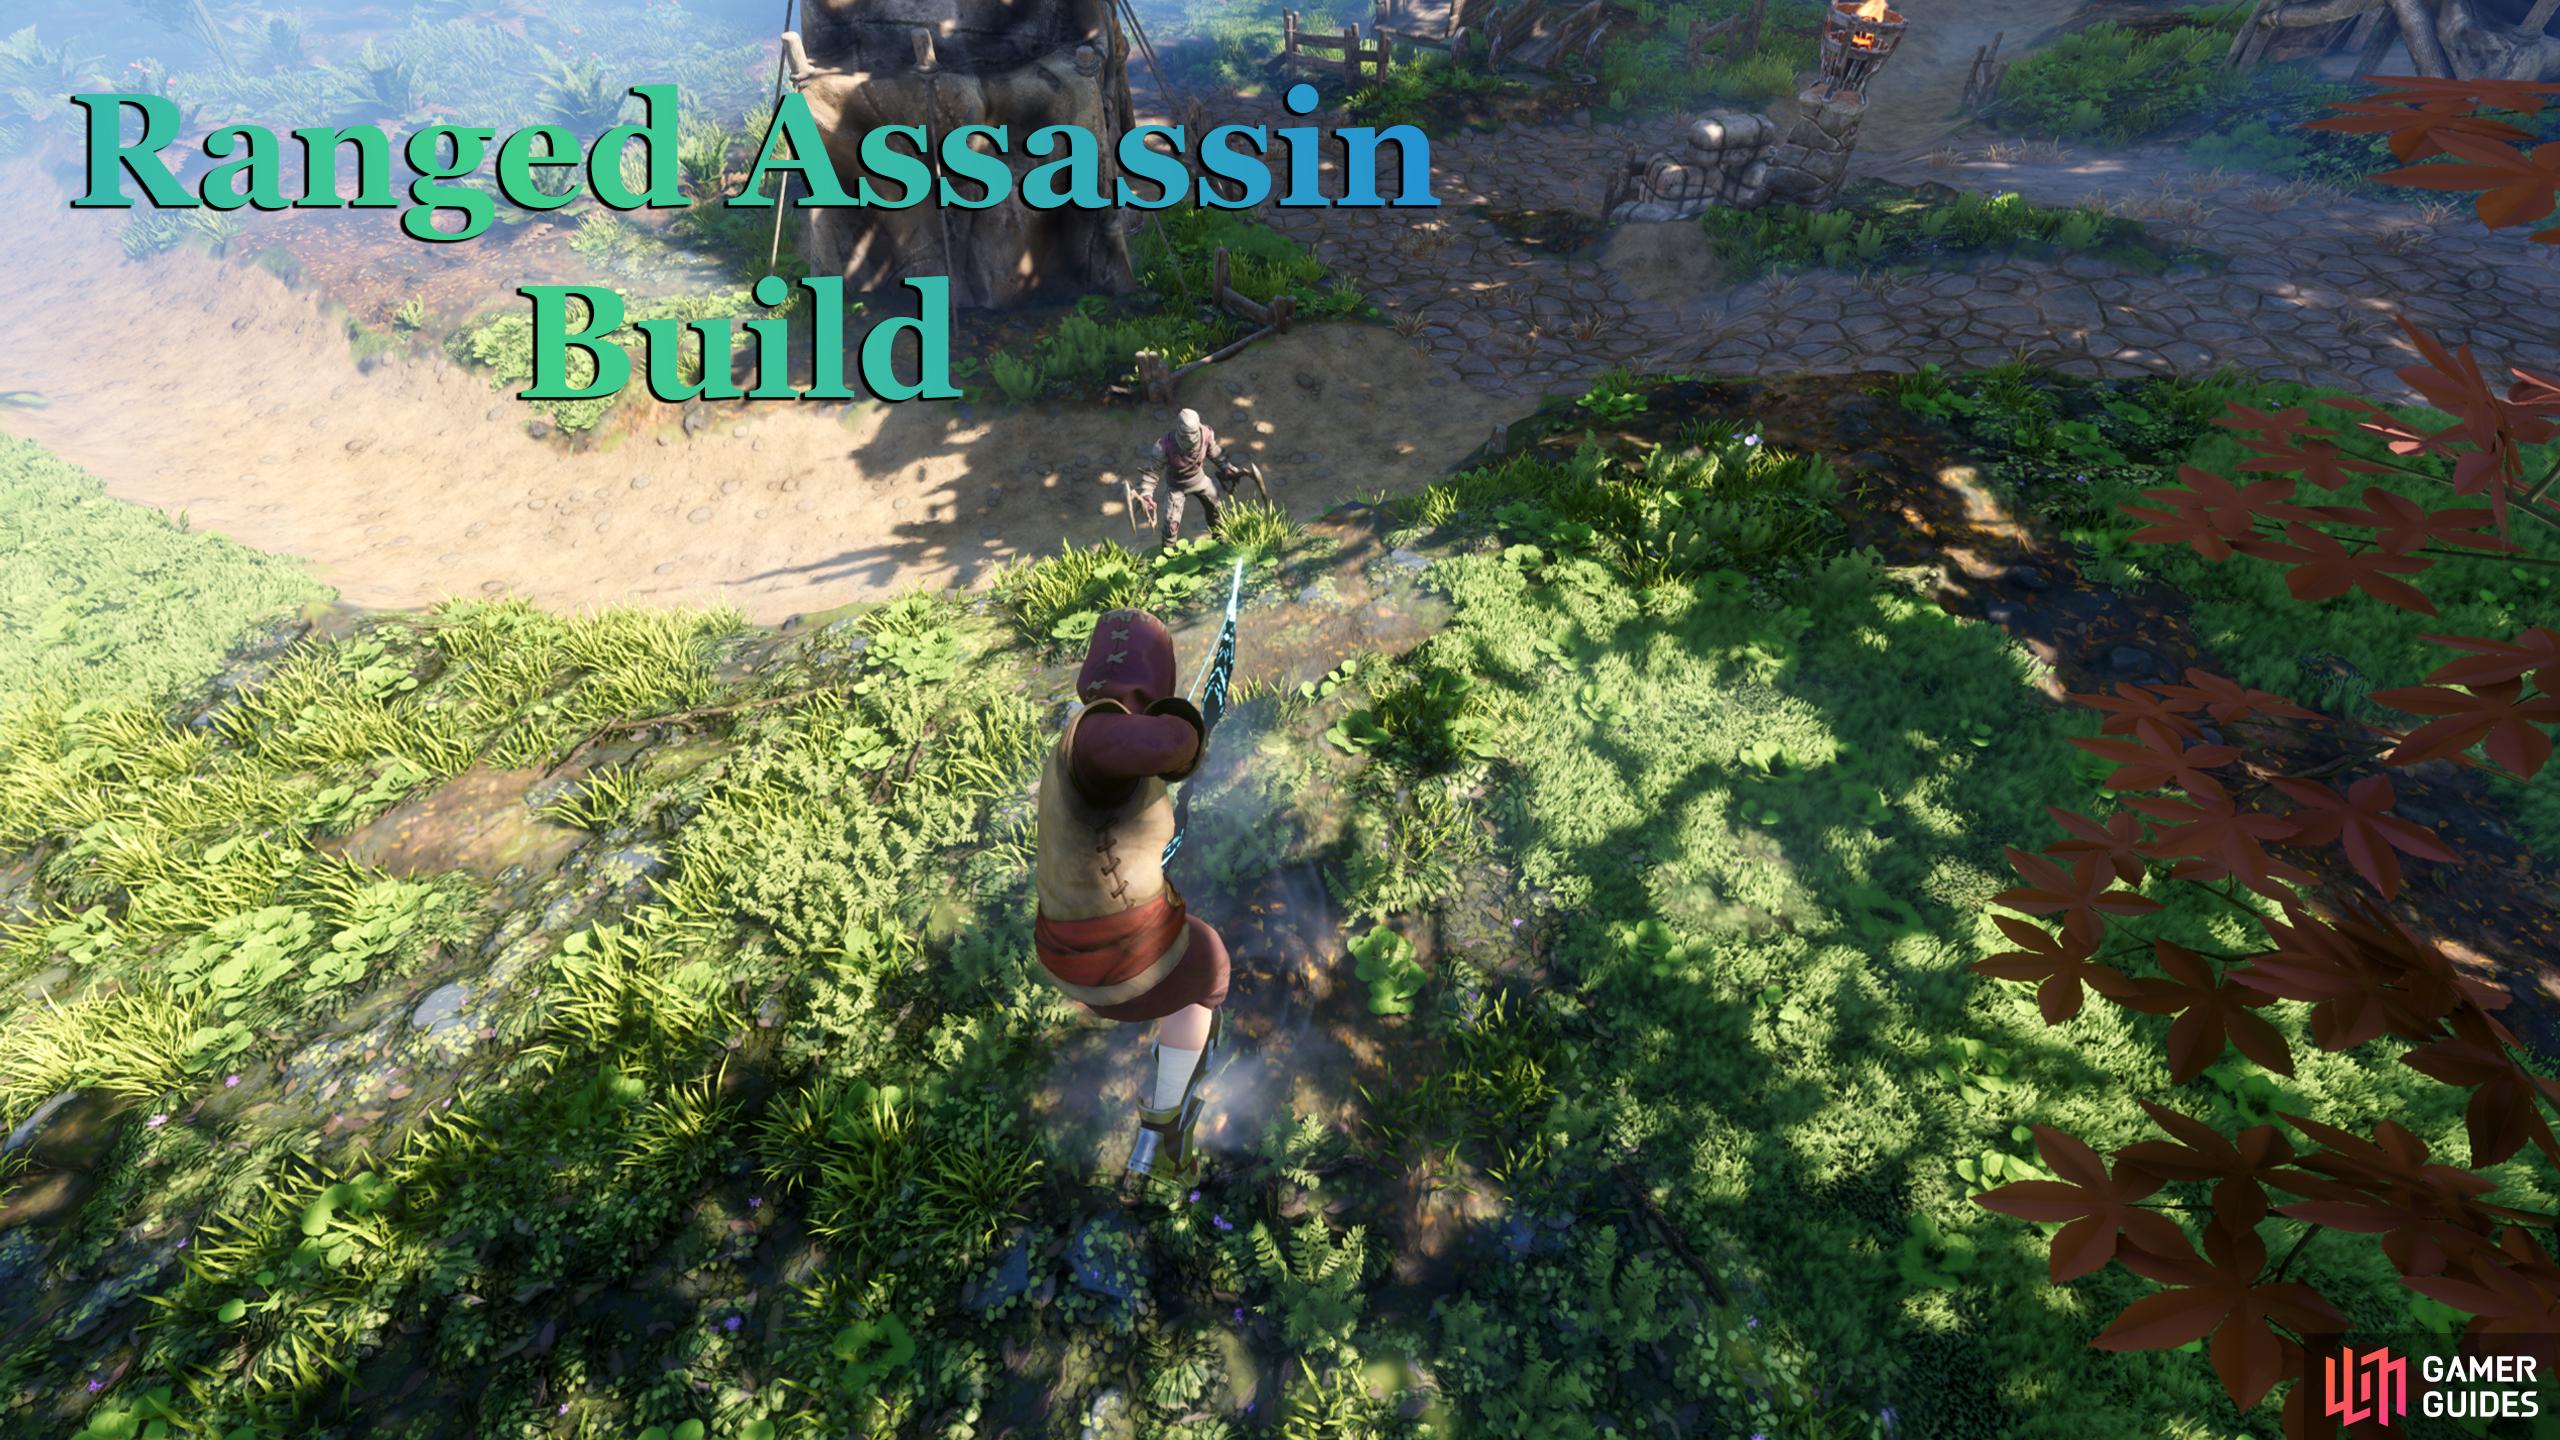 The Ranged Assassin Build utilizes both the Ranger and Assassin skill trees, hence its name.